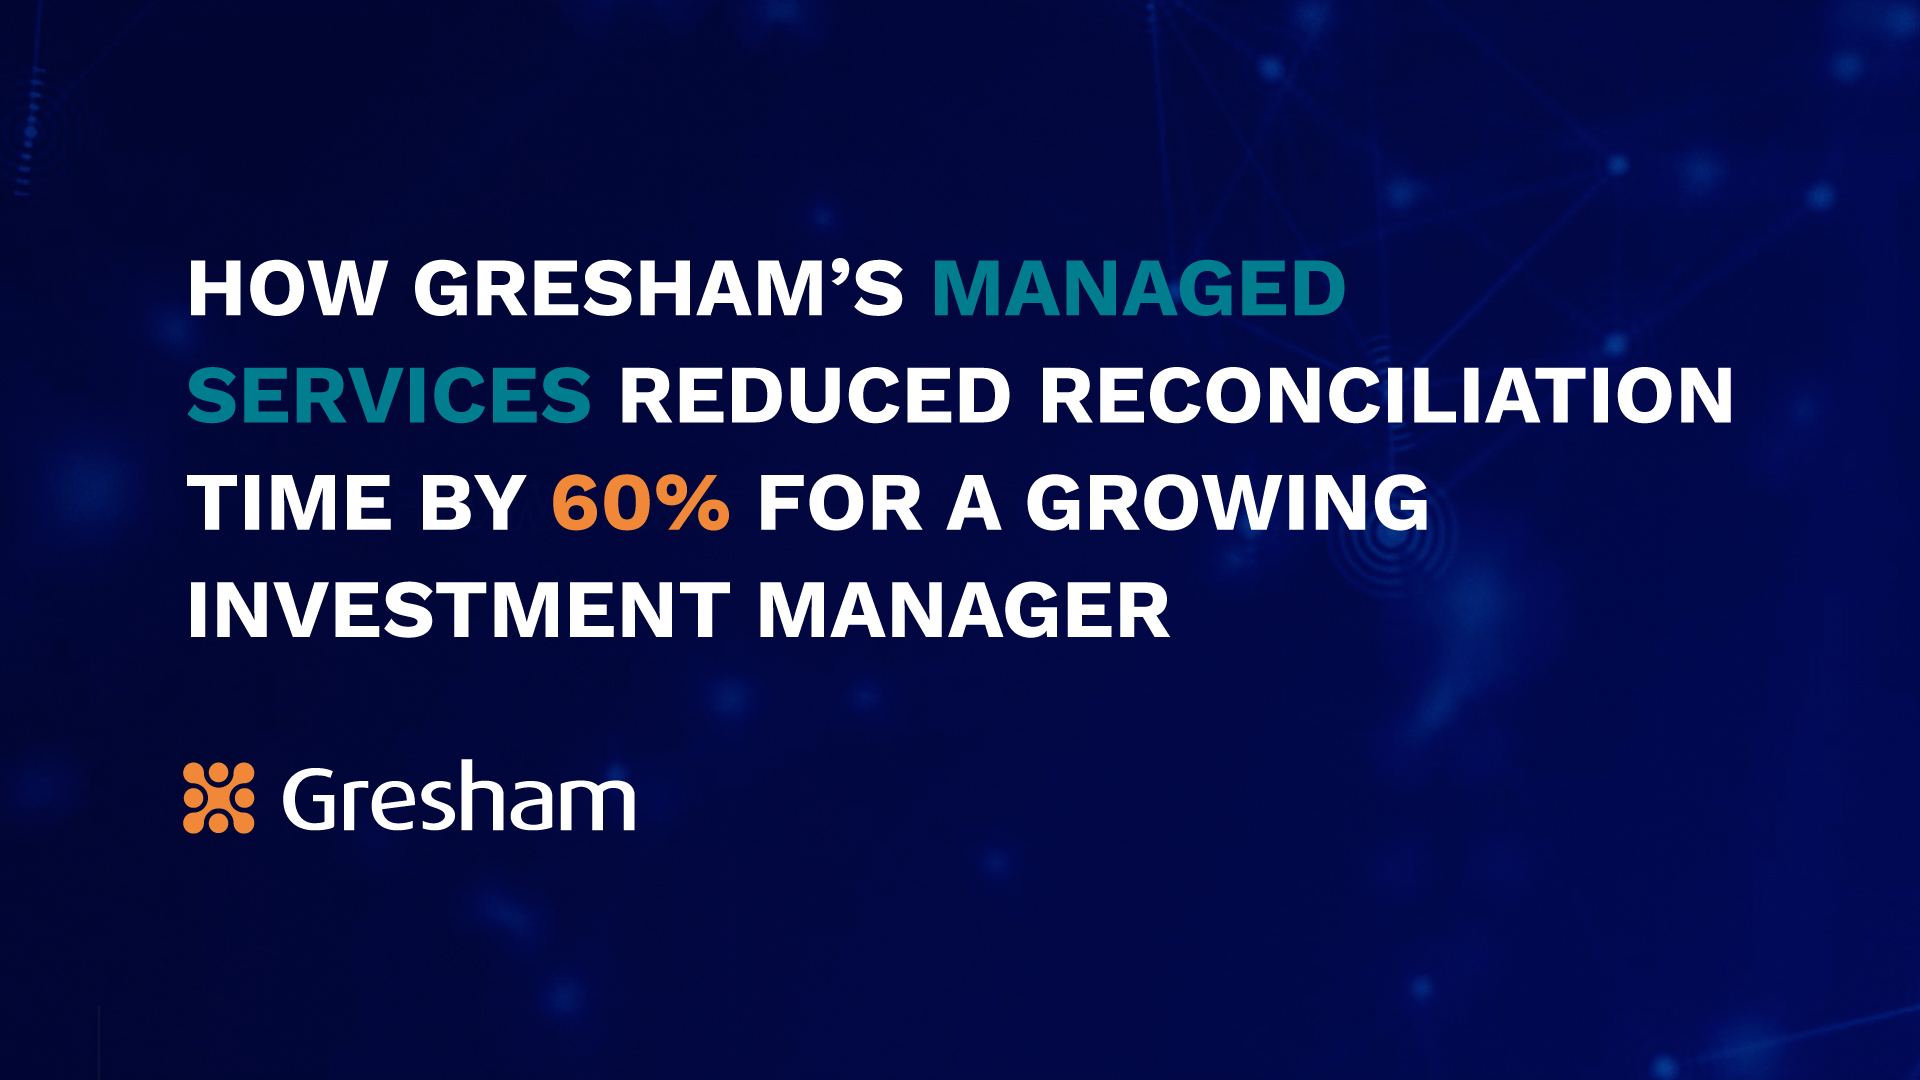 WCM Investment Management Slashes Reconciliation Times Amid Major AUM  Growth with Gresham's Managed Services